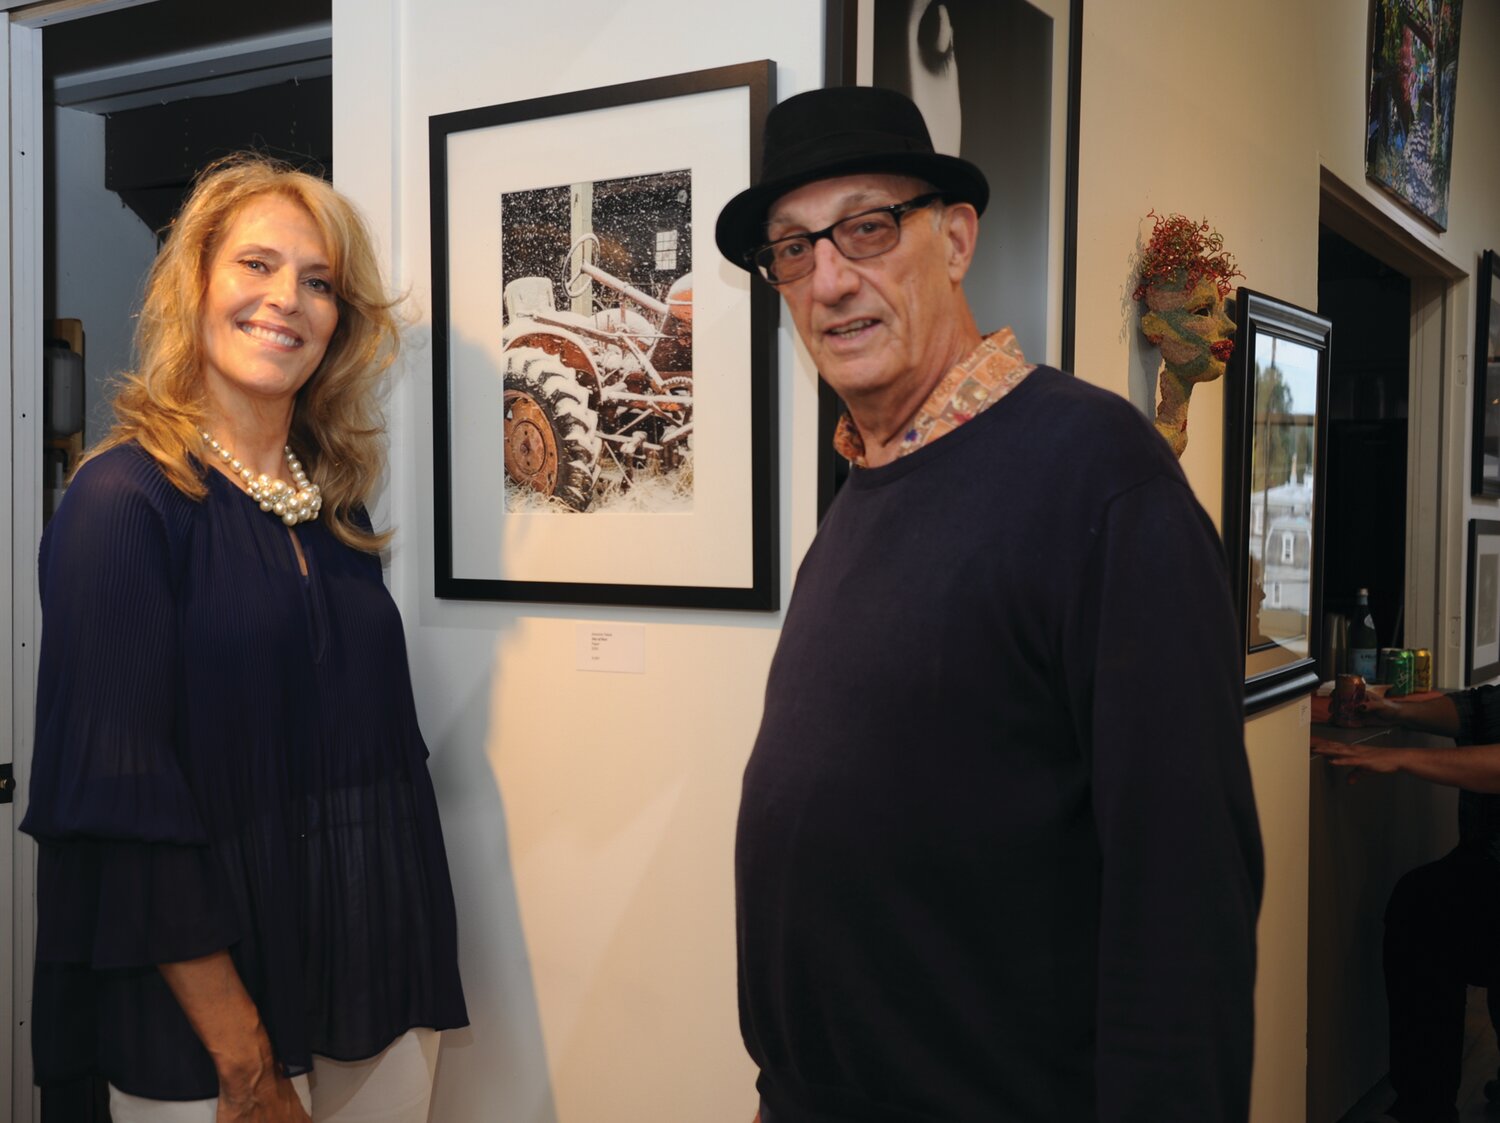 Jeanette Talese with her artwork, “Day of Rest,” and Peter Rosenthal, creative director of Makers Alley and curator of the show.